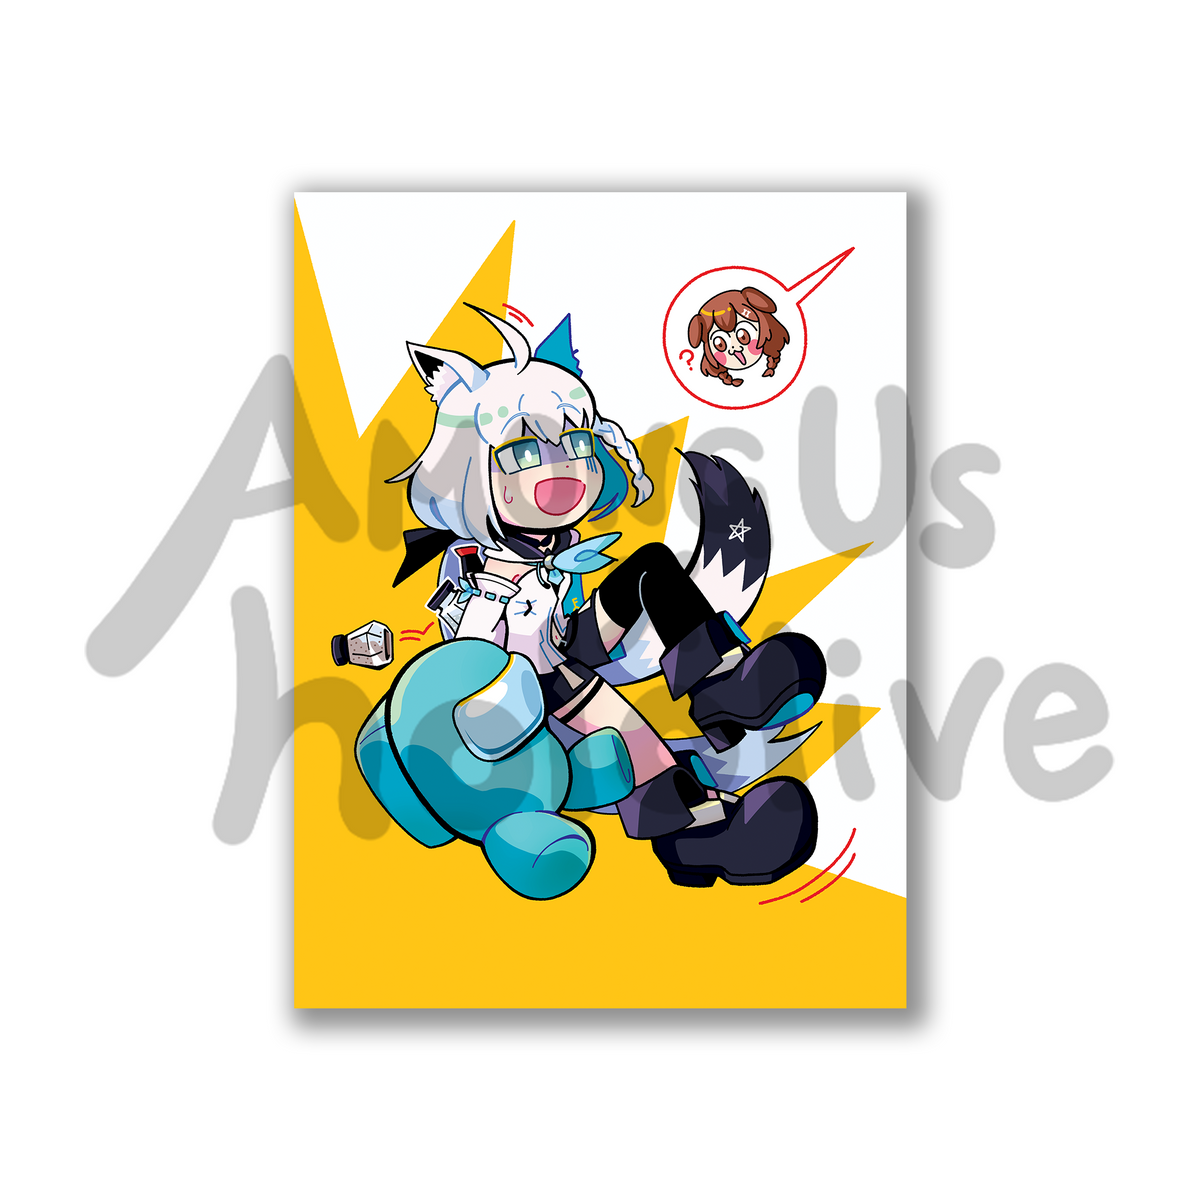 A poster of Shirakami Fubuki from Hololive sitting beside a large cyan crewmate and chatting.